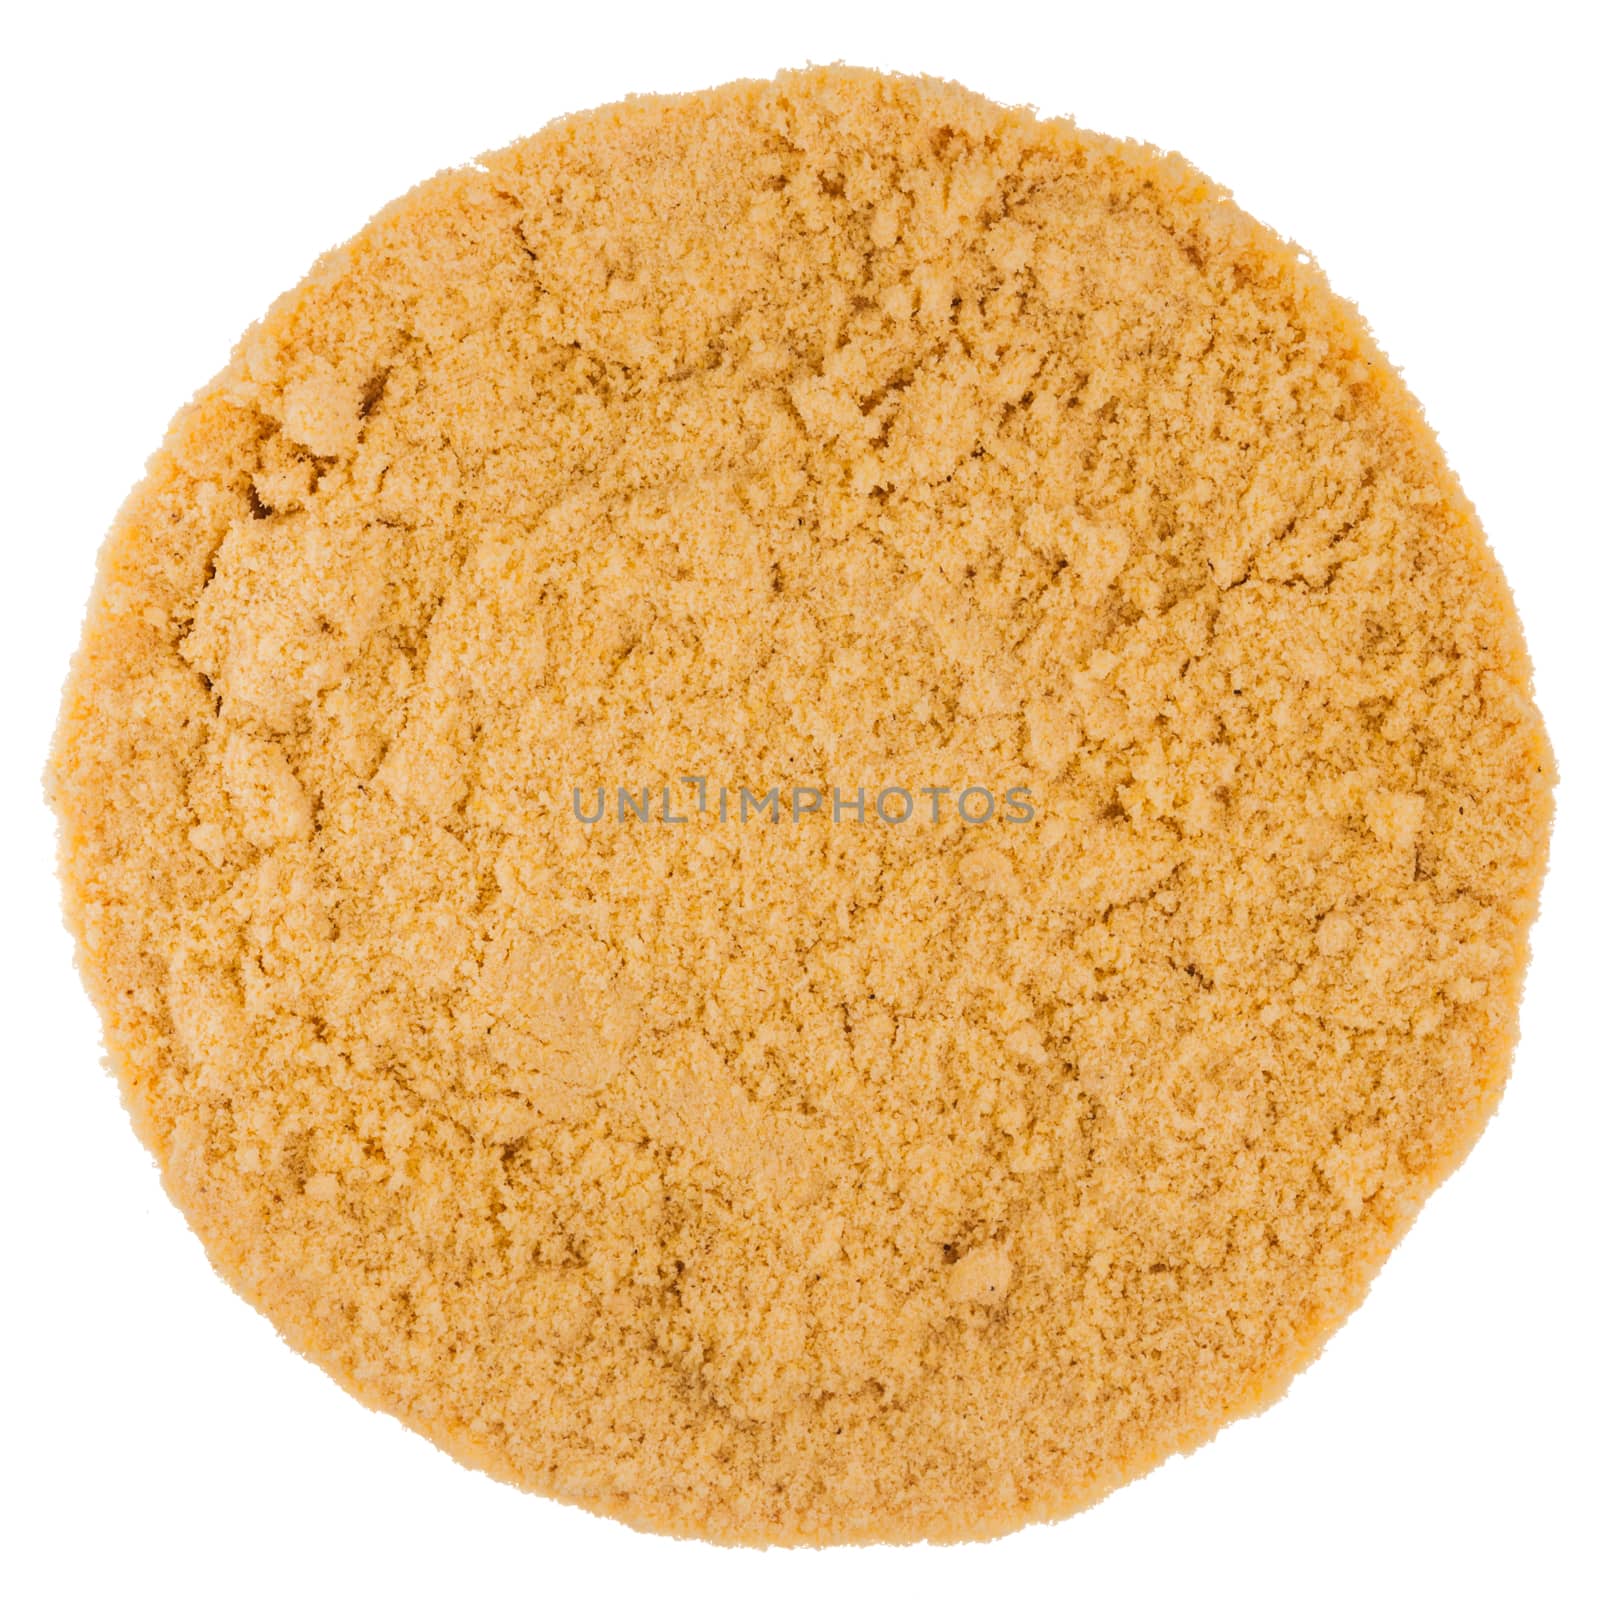 Extreme Macro Closeup of Mustard Powder texture in Circle Isolated on White Background